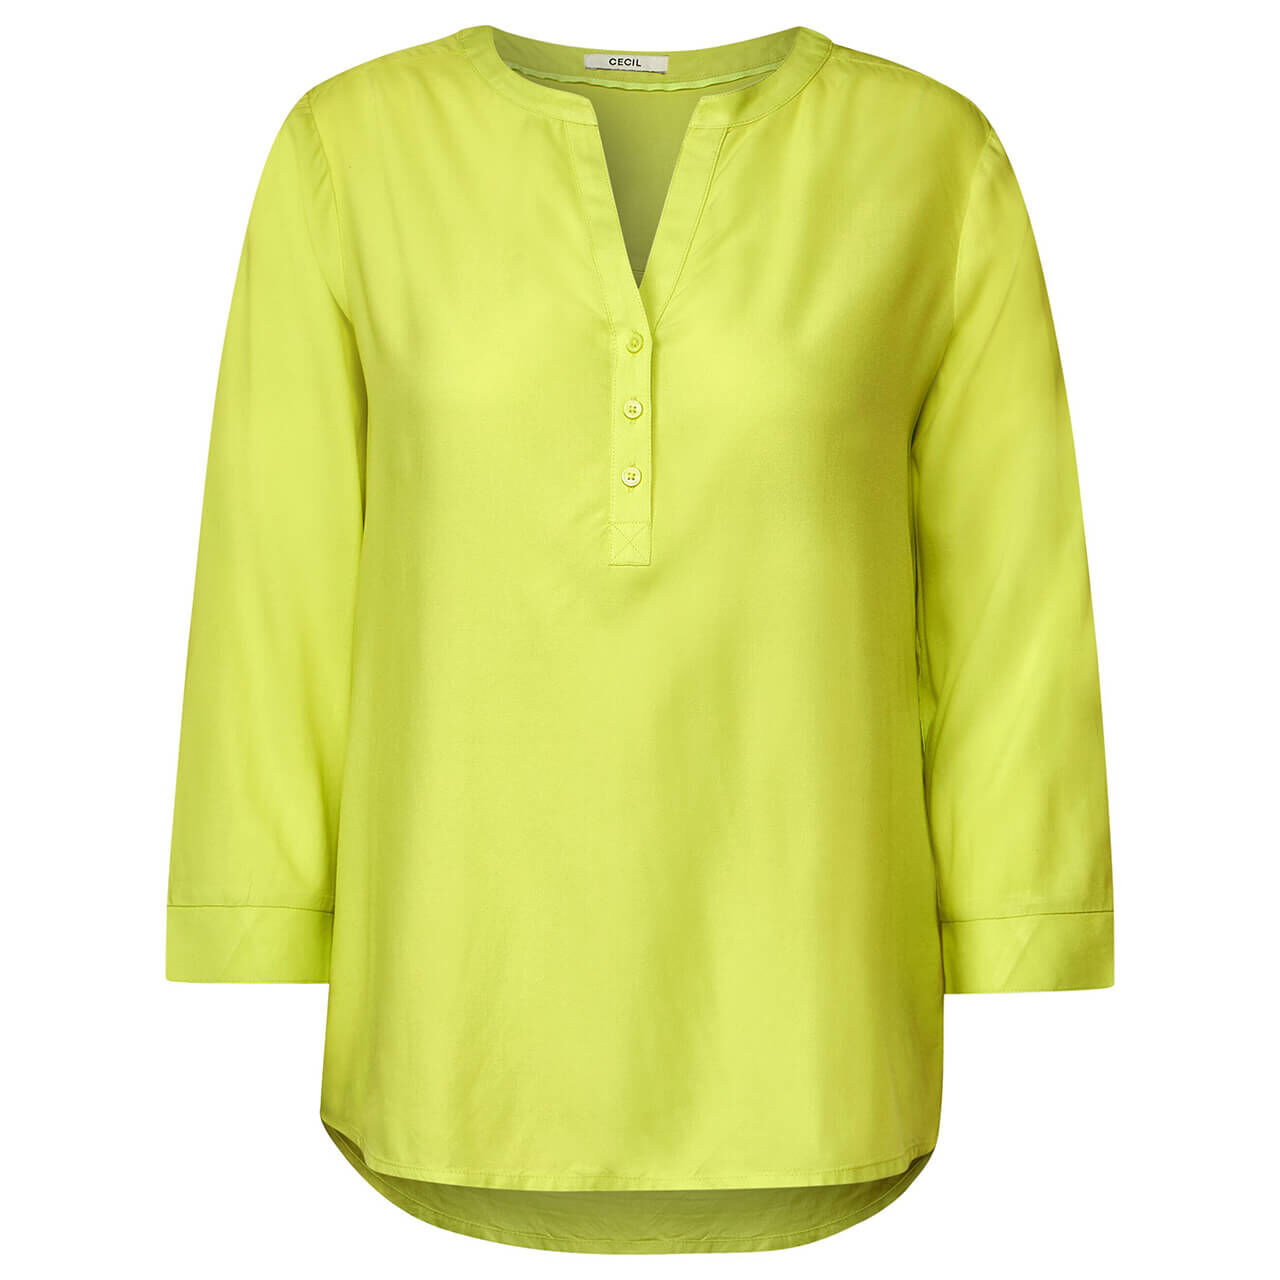 Cecil Solid Damen 3/4 Arm Bluse limelight yellow